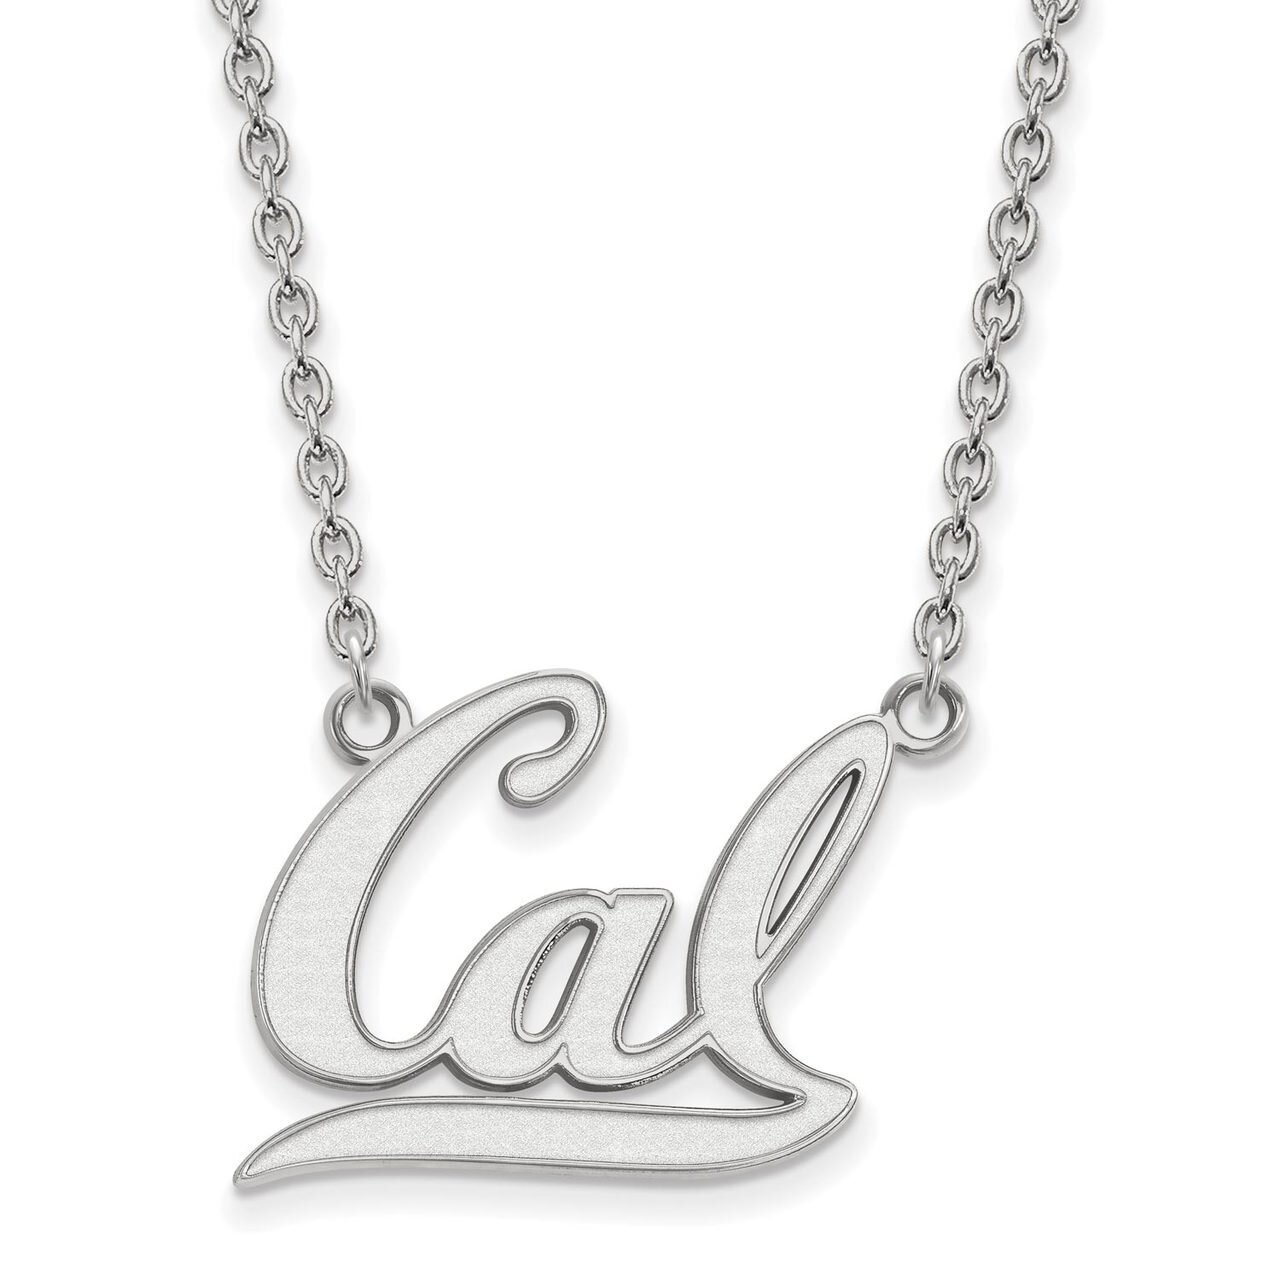 University of California Berkeley Large Pendant with Chain Necklace 14k White Gold 4W012UCB-18